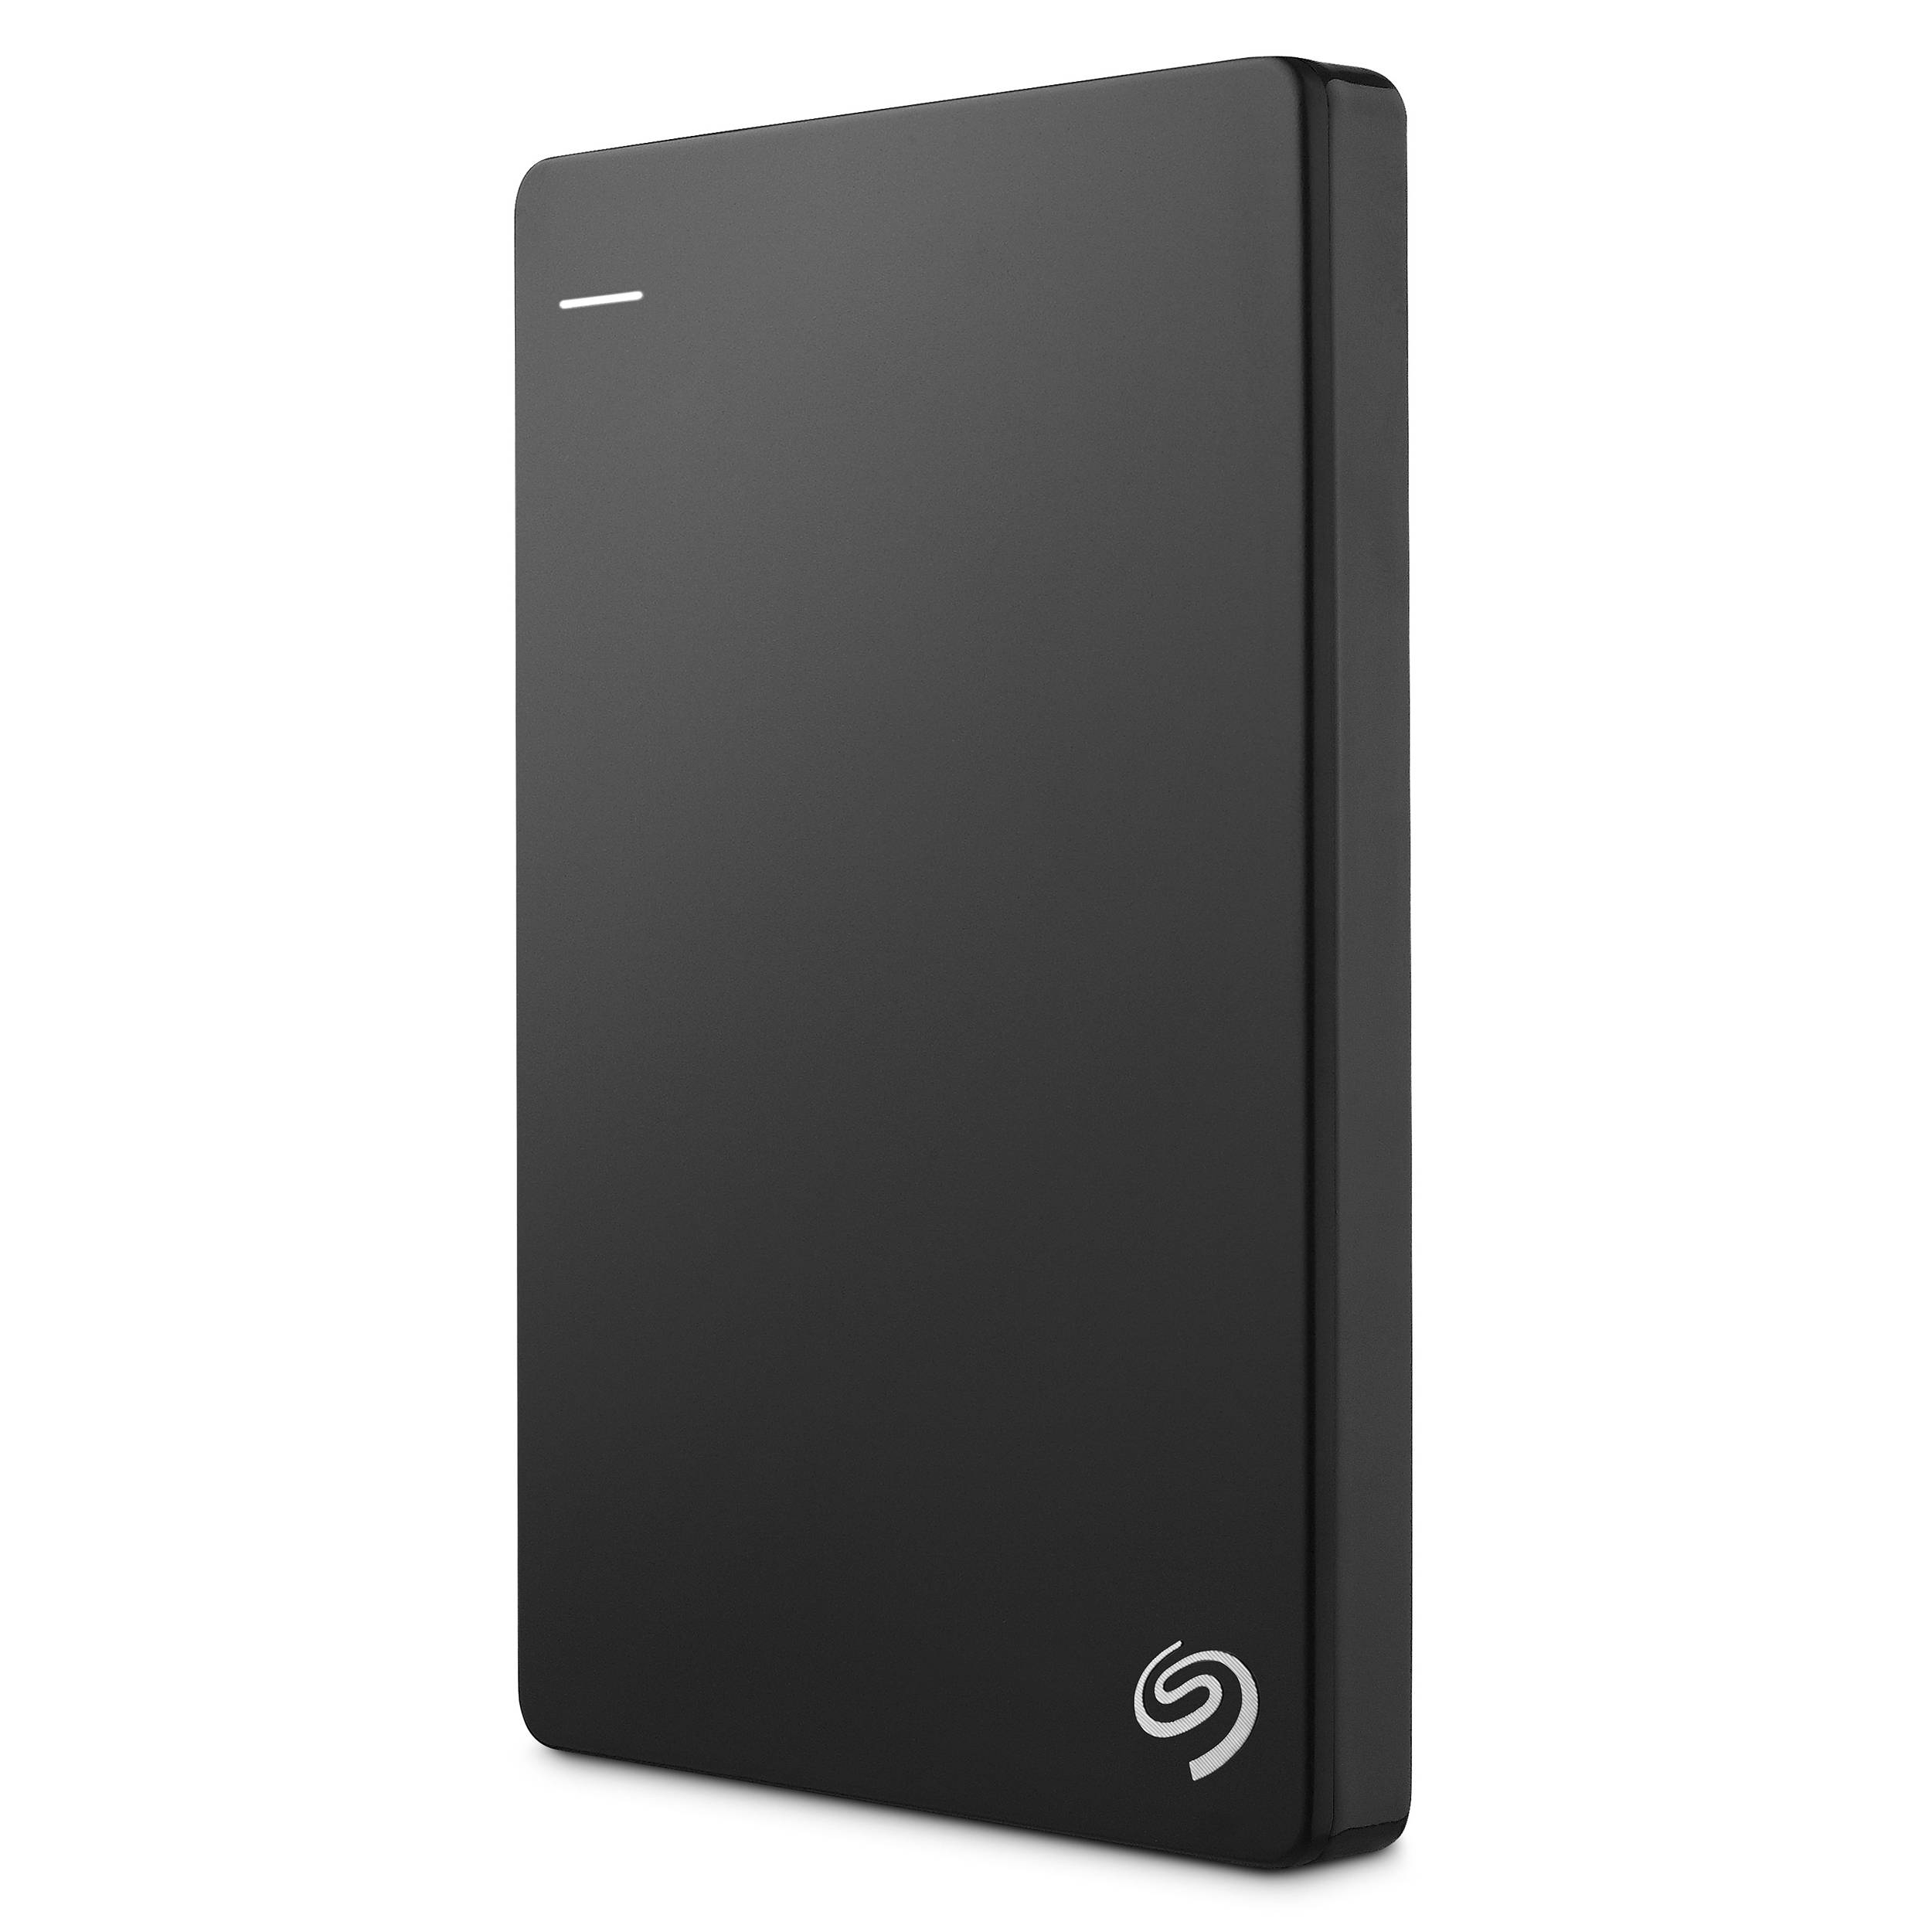 Image result for seagate external hard drive